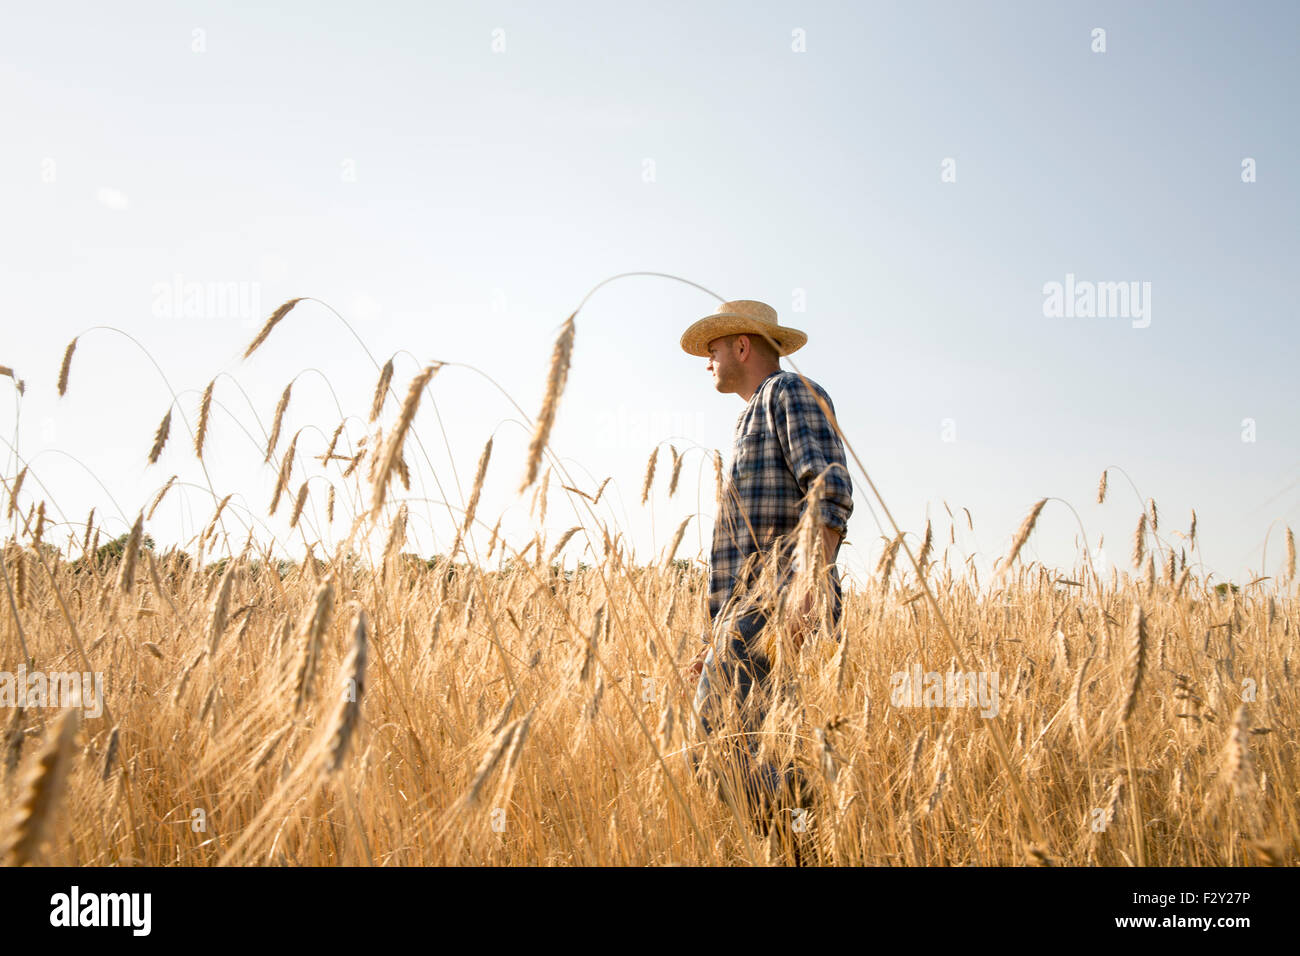 Man wearing a checkered shirt and a hat standing in a cornfield, a farmer. Stock Photo